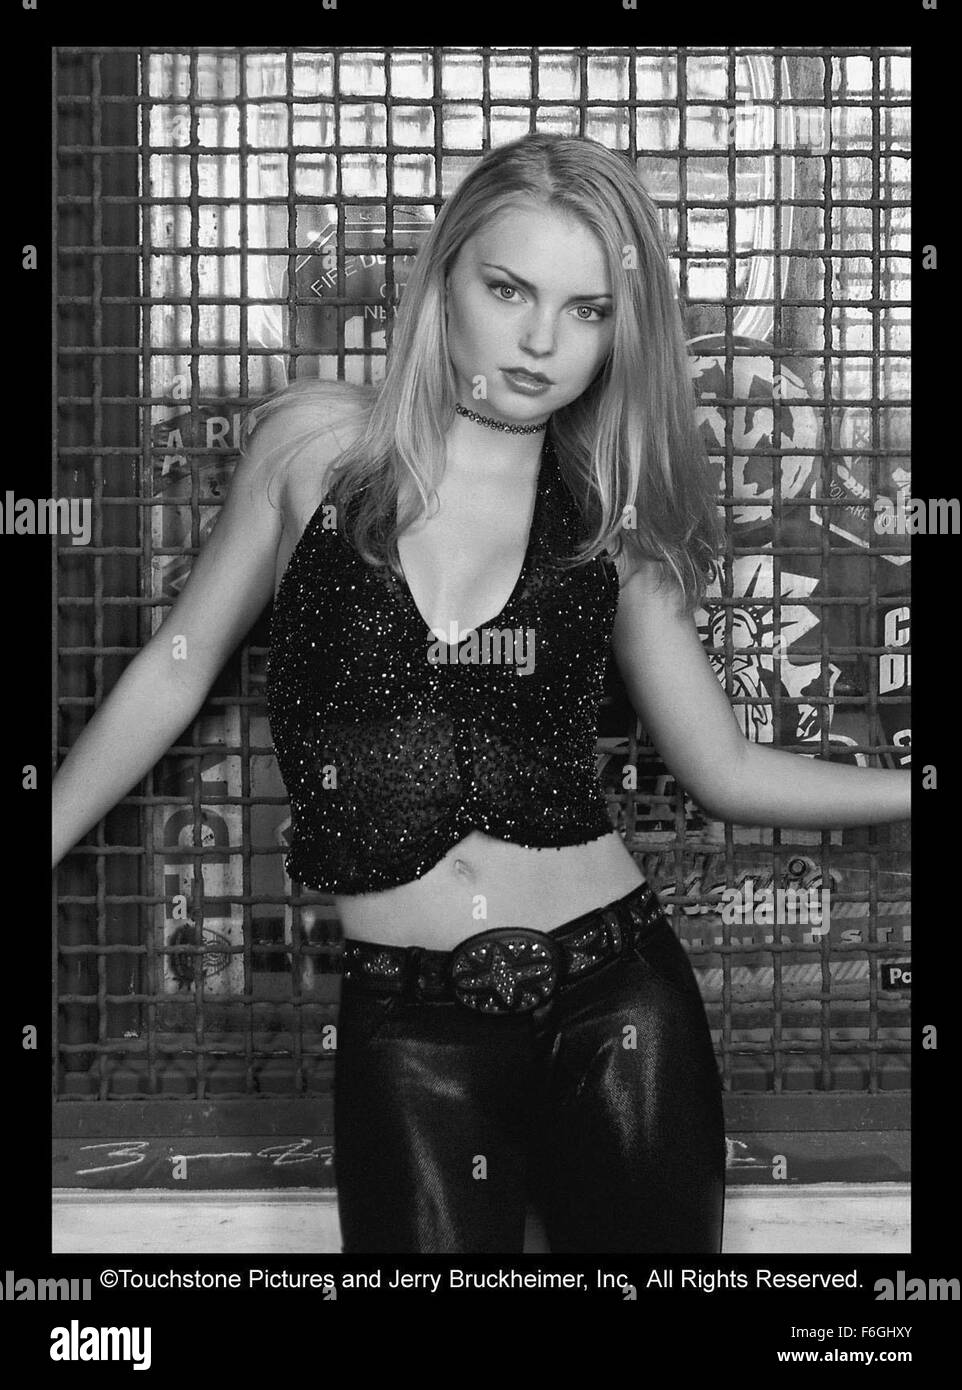 RELEASE DATE: August 04, 2000.   MOVIE TITLE: Coyote Ugly.   STUDIO: Touhcstone Pictures.   DIRECTOR: David McNally.   PLOT: Aspiring songwriter Violet Sanford, after getting a job at a women-run NYC bar that teases its male patrons, comes out of her shell.   PICTURED: Izabella Miko as Cammie   (Credit Image: c  Touchstone Pictures/Entertainment Pictures) Stock Photo